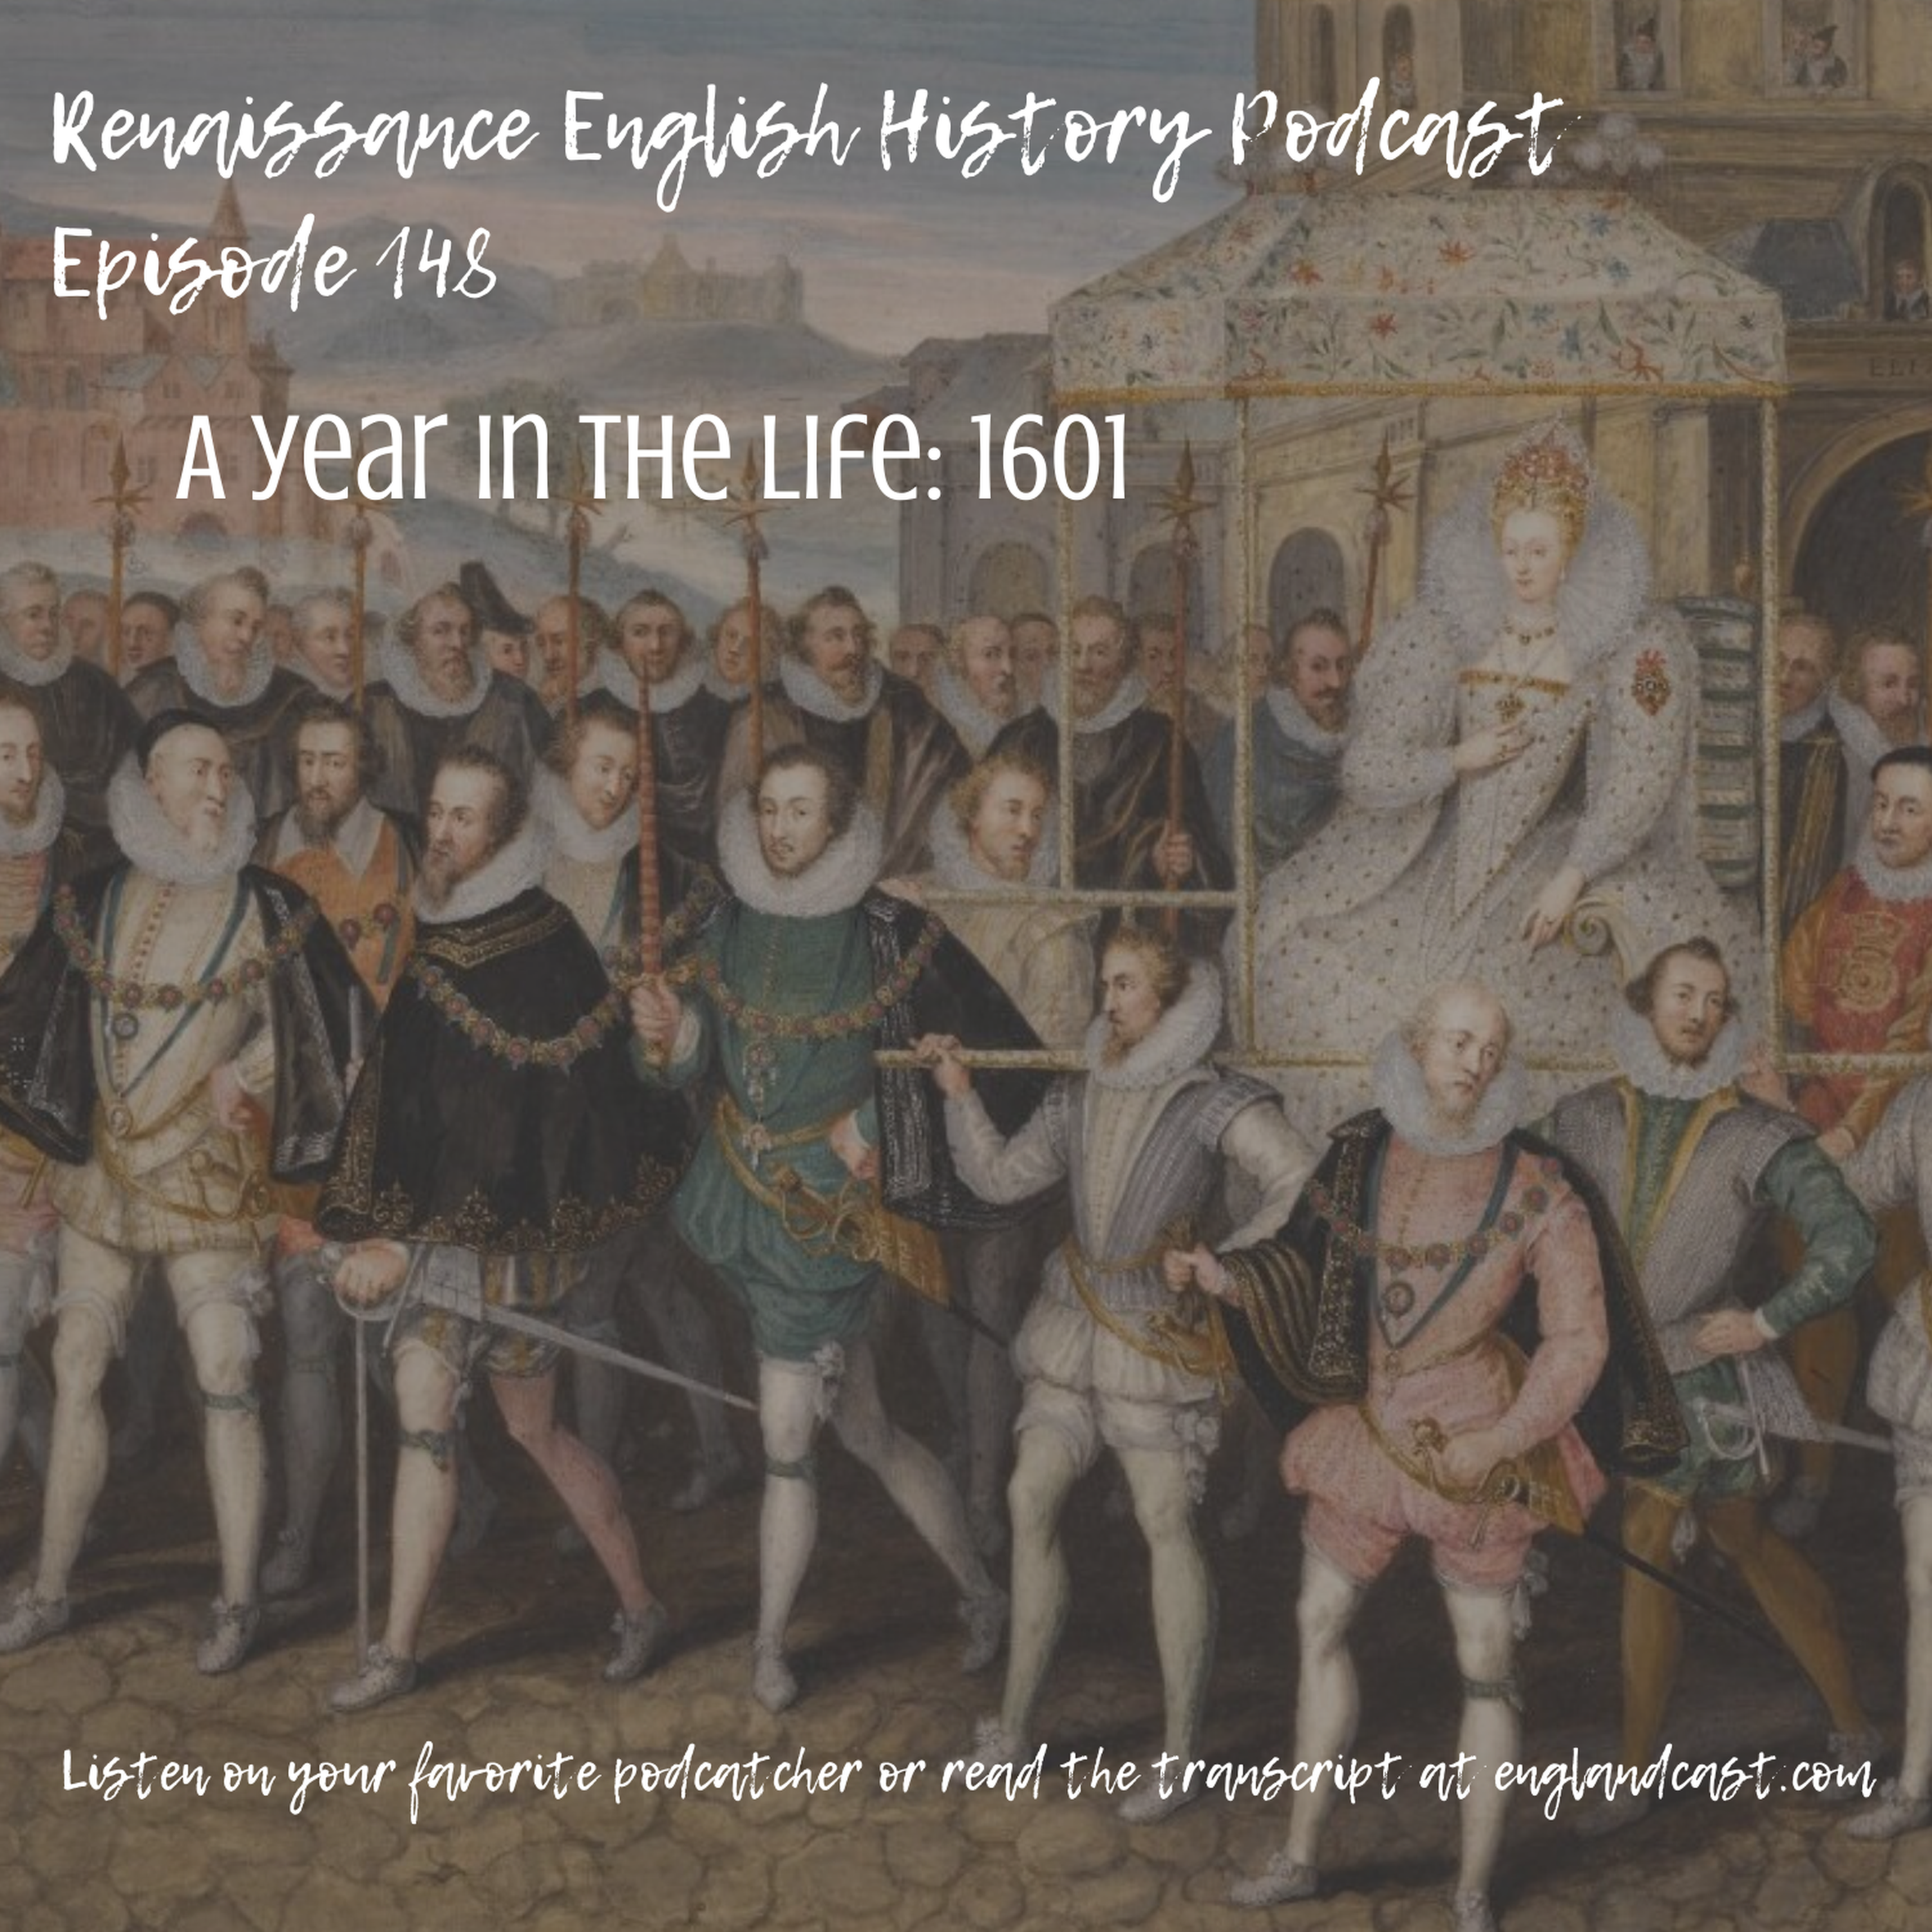 Episode 148: A Year in the Life - 1601